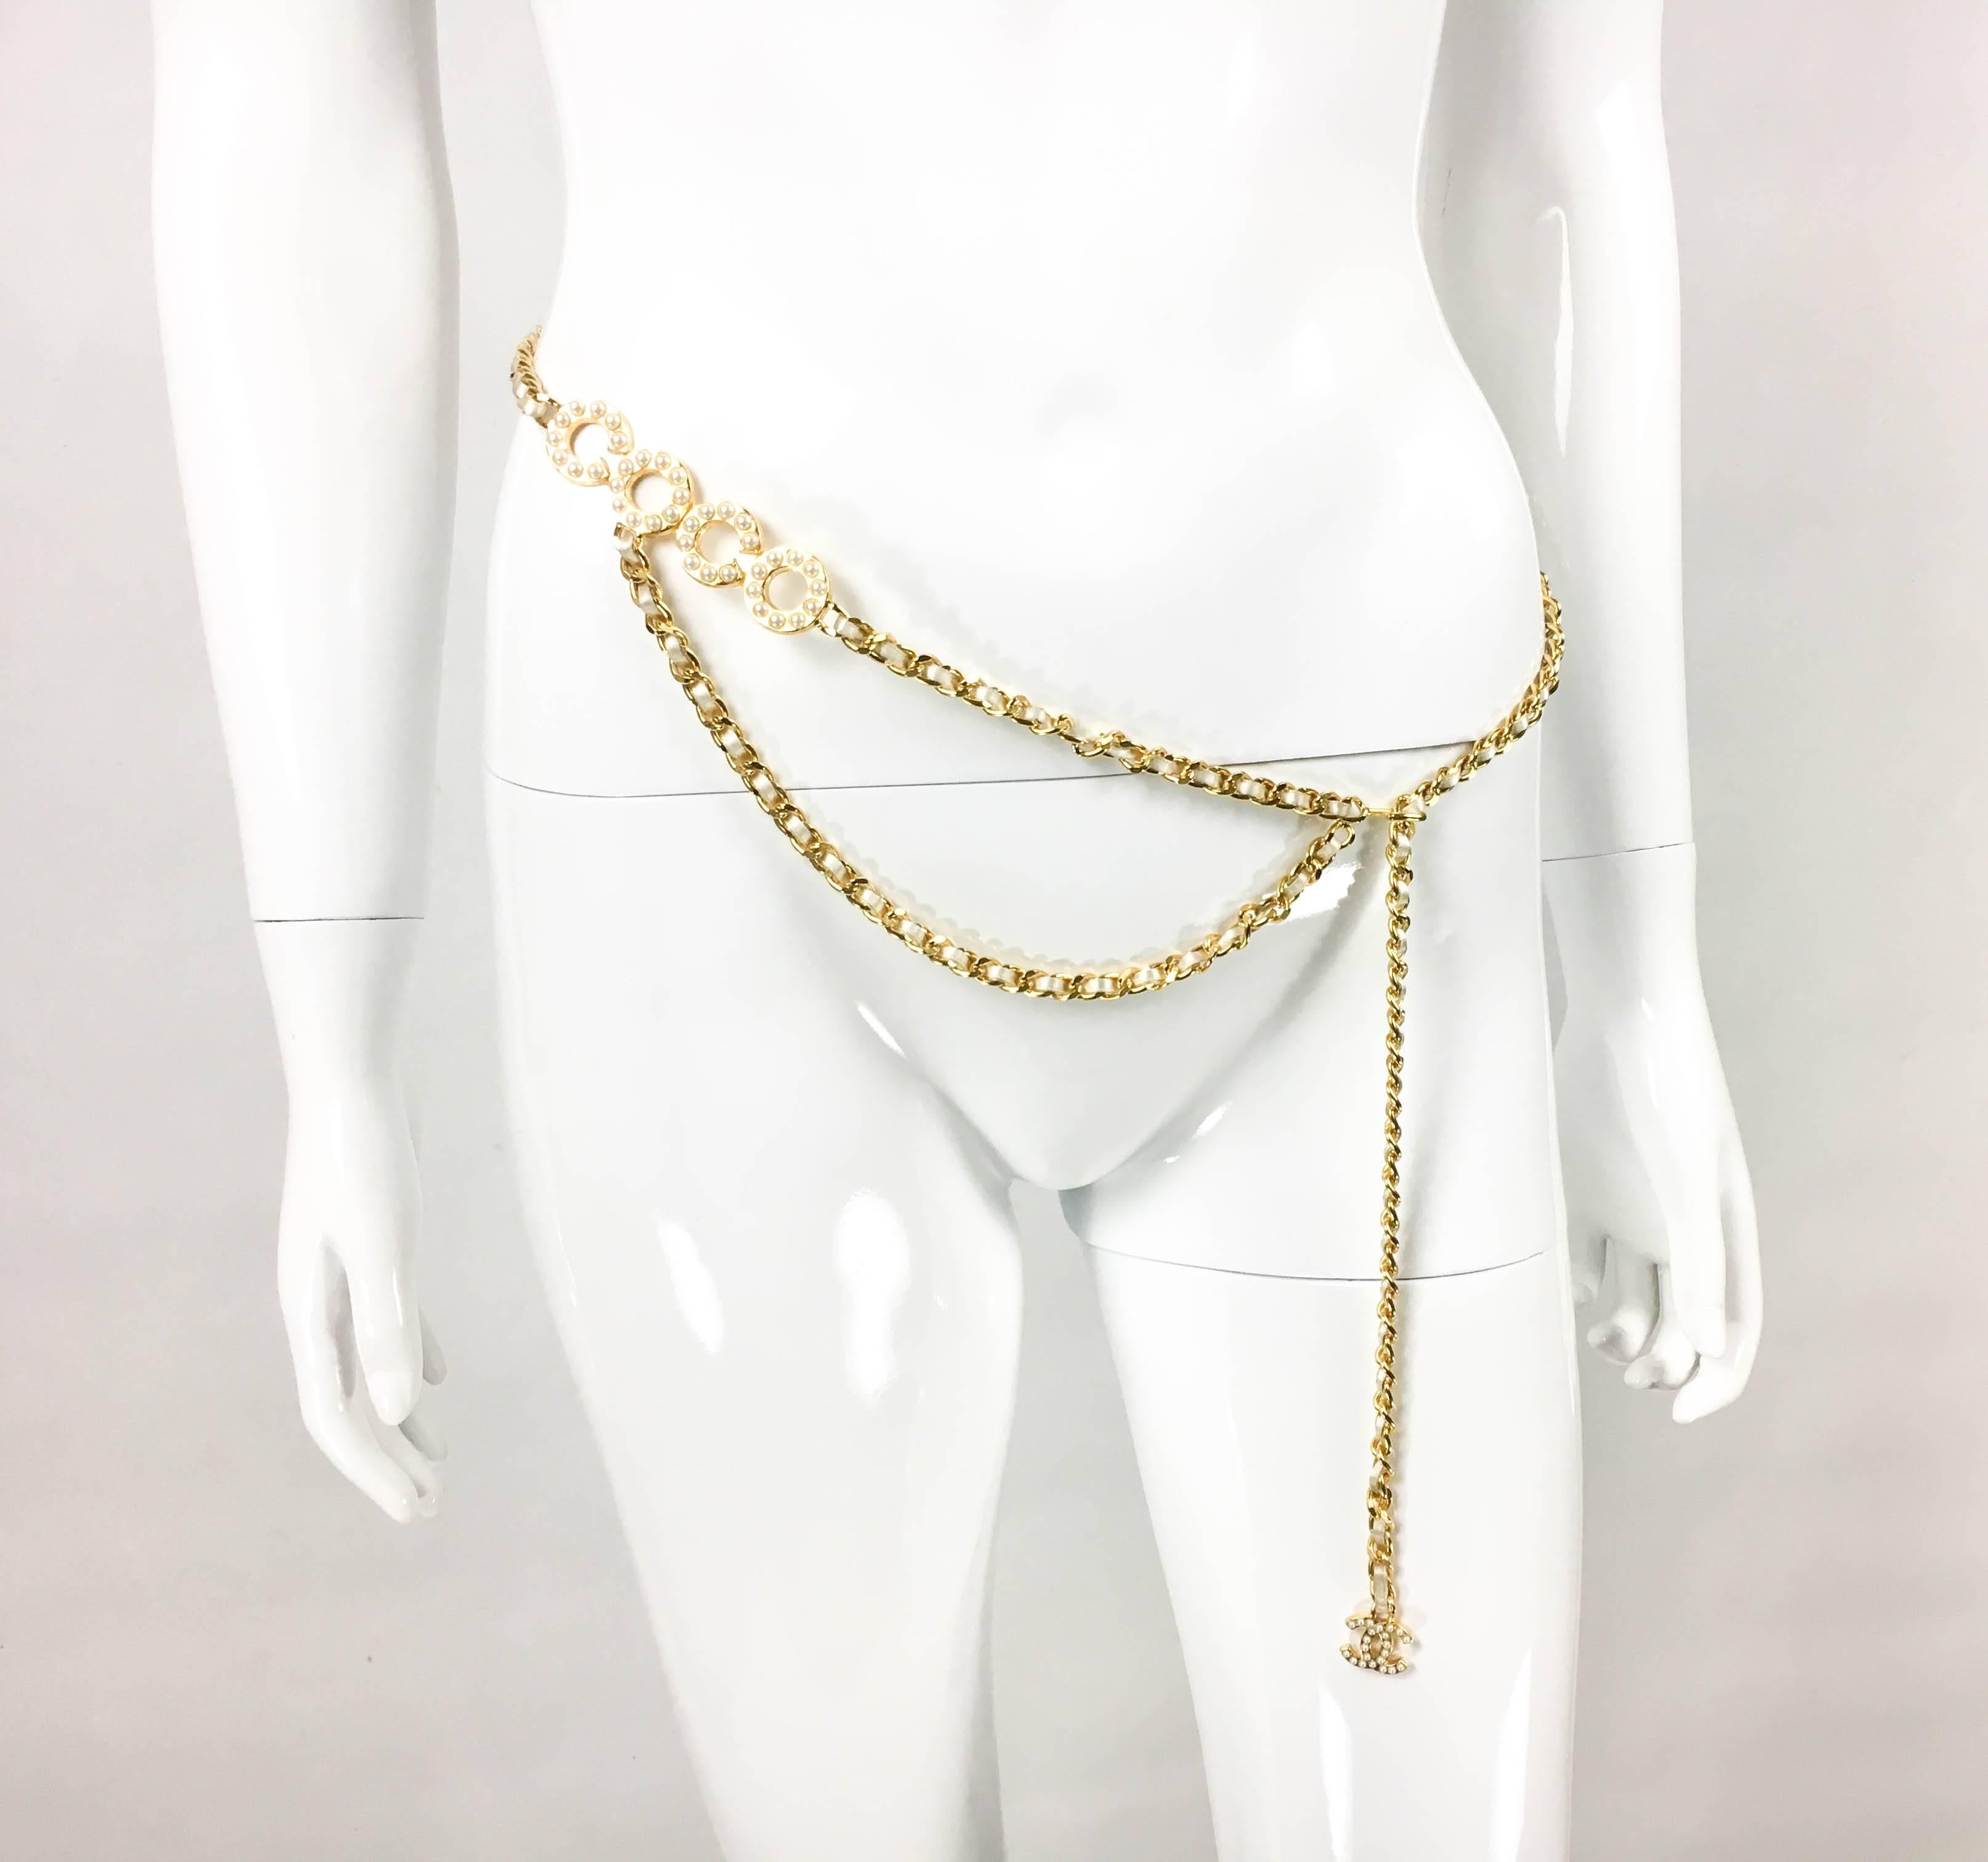 Chanel Gold-Tone Woven Chain and Faux Pearl 'Coco' Belt / Necklace - 2001 In Excellent Condition In London, Chelsea